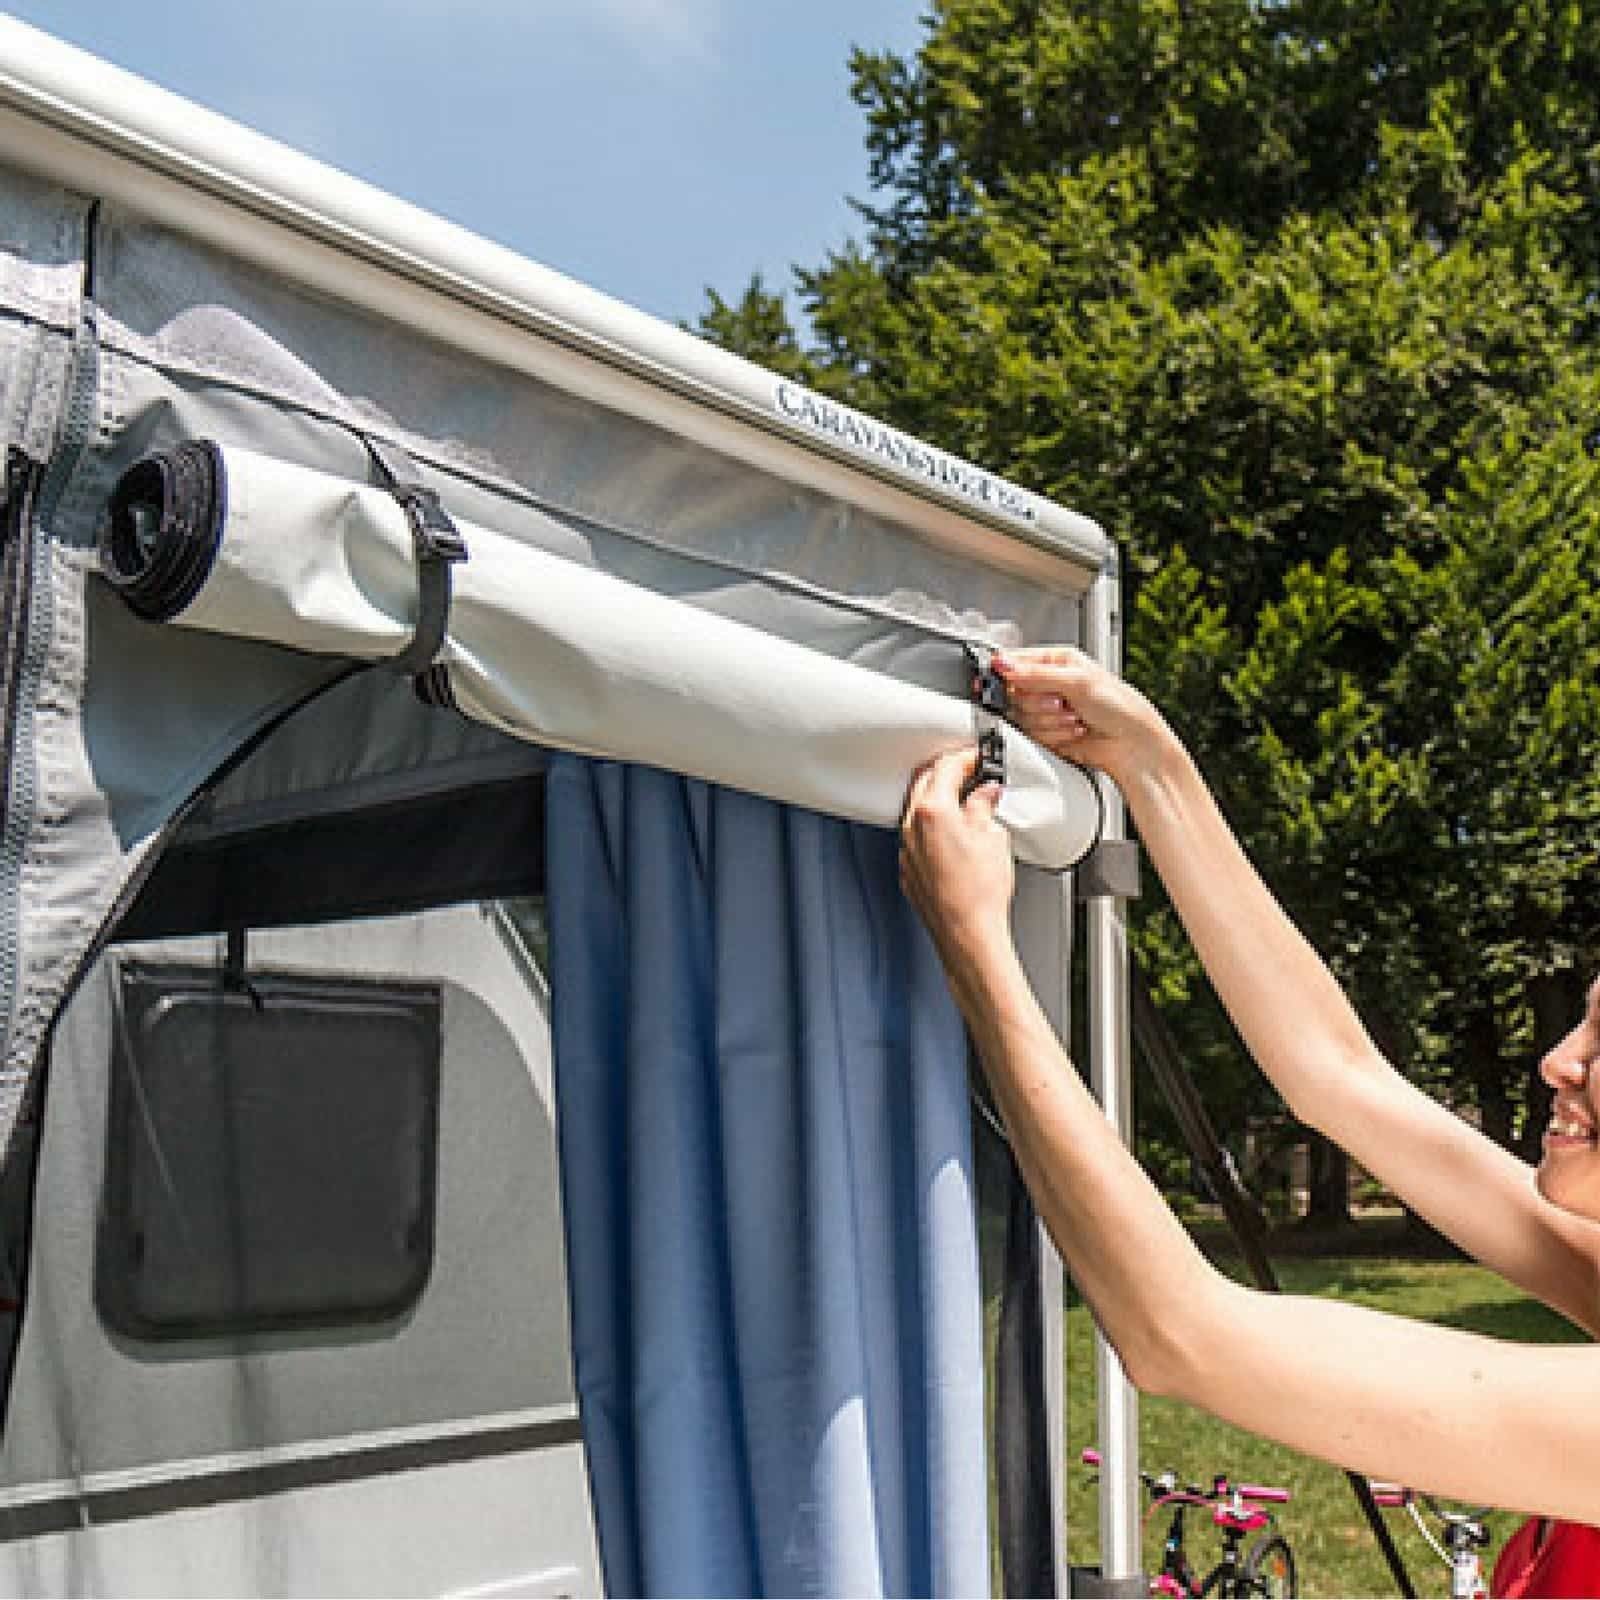 Fiamma Caravanstore ZIP Awning Front & Side Panels made by Fiamma. A Accessories sold by Quality Caravan Awnings